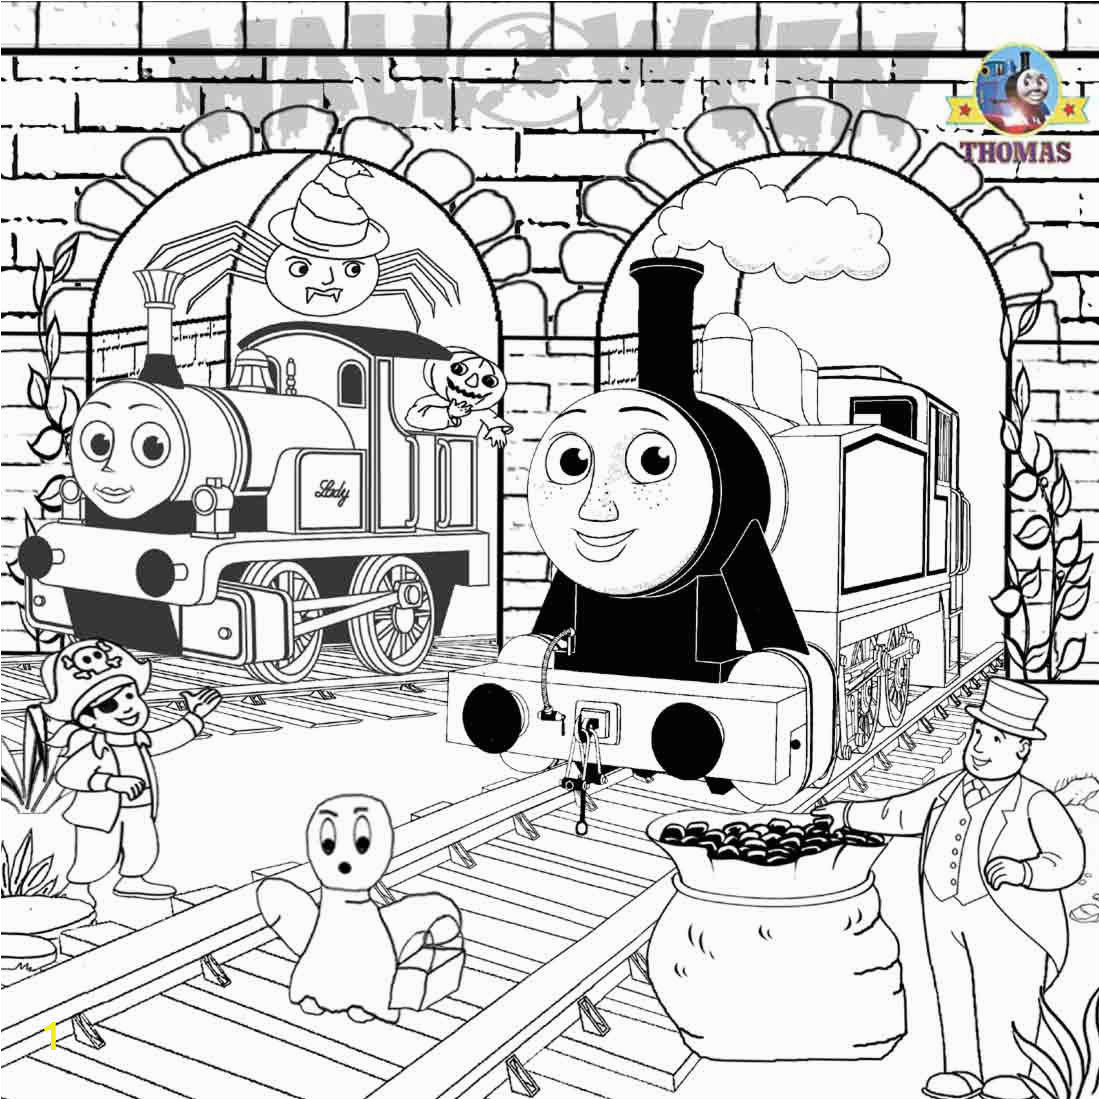 Thomas the Train Halloween Coloring Pages Thomas the Train Halloween Worksheets for Kids